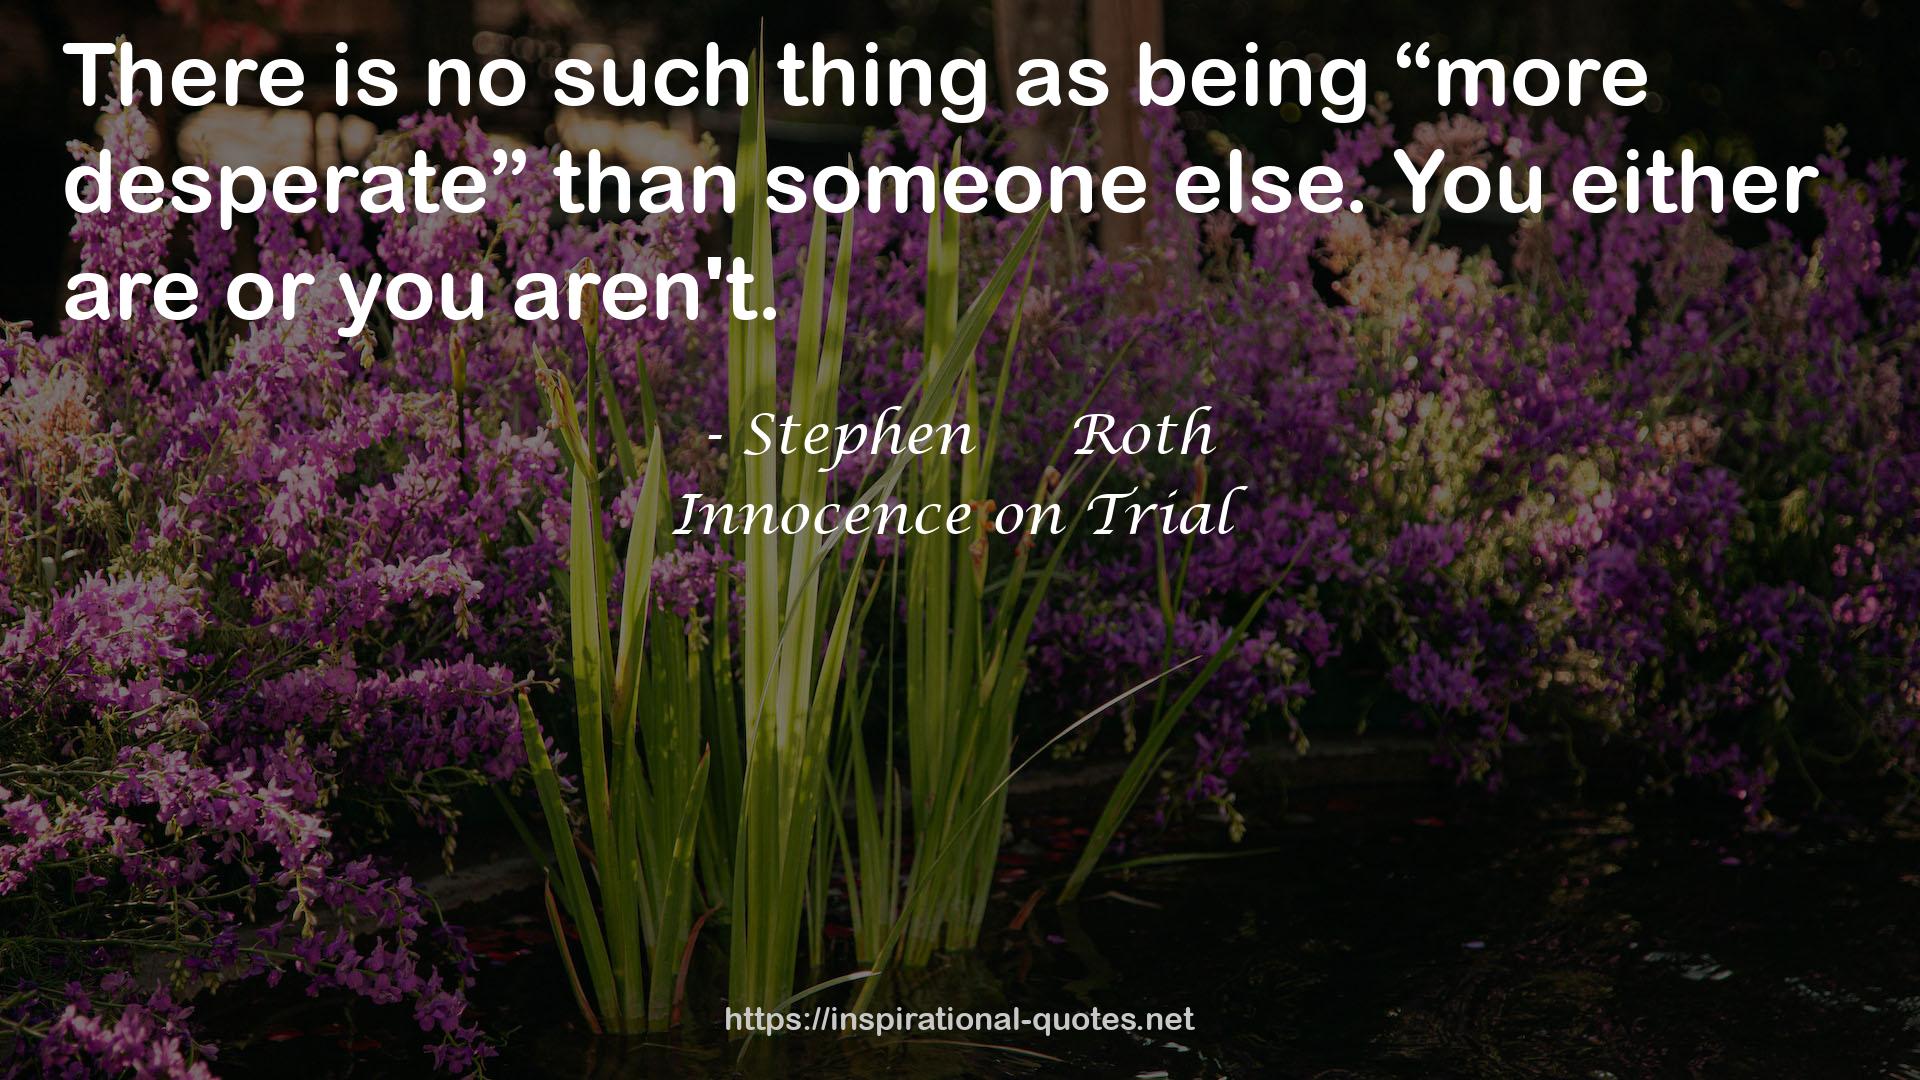 Innocence on Trial QUOTES